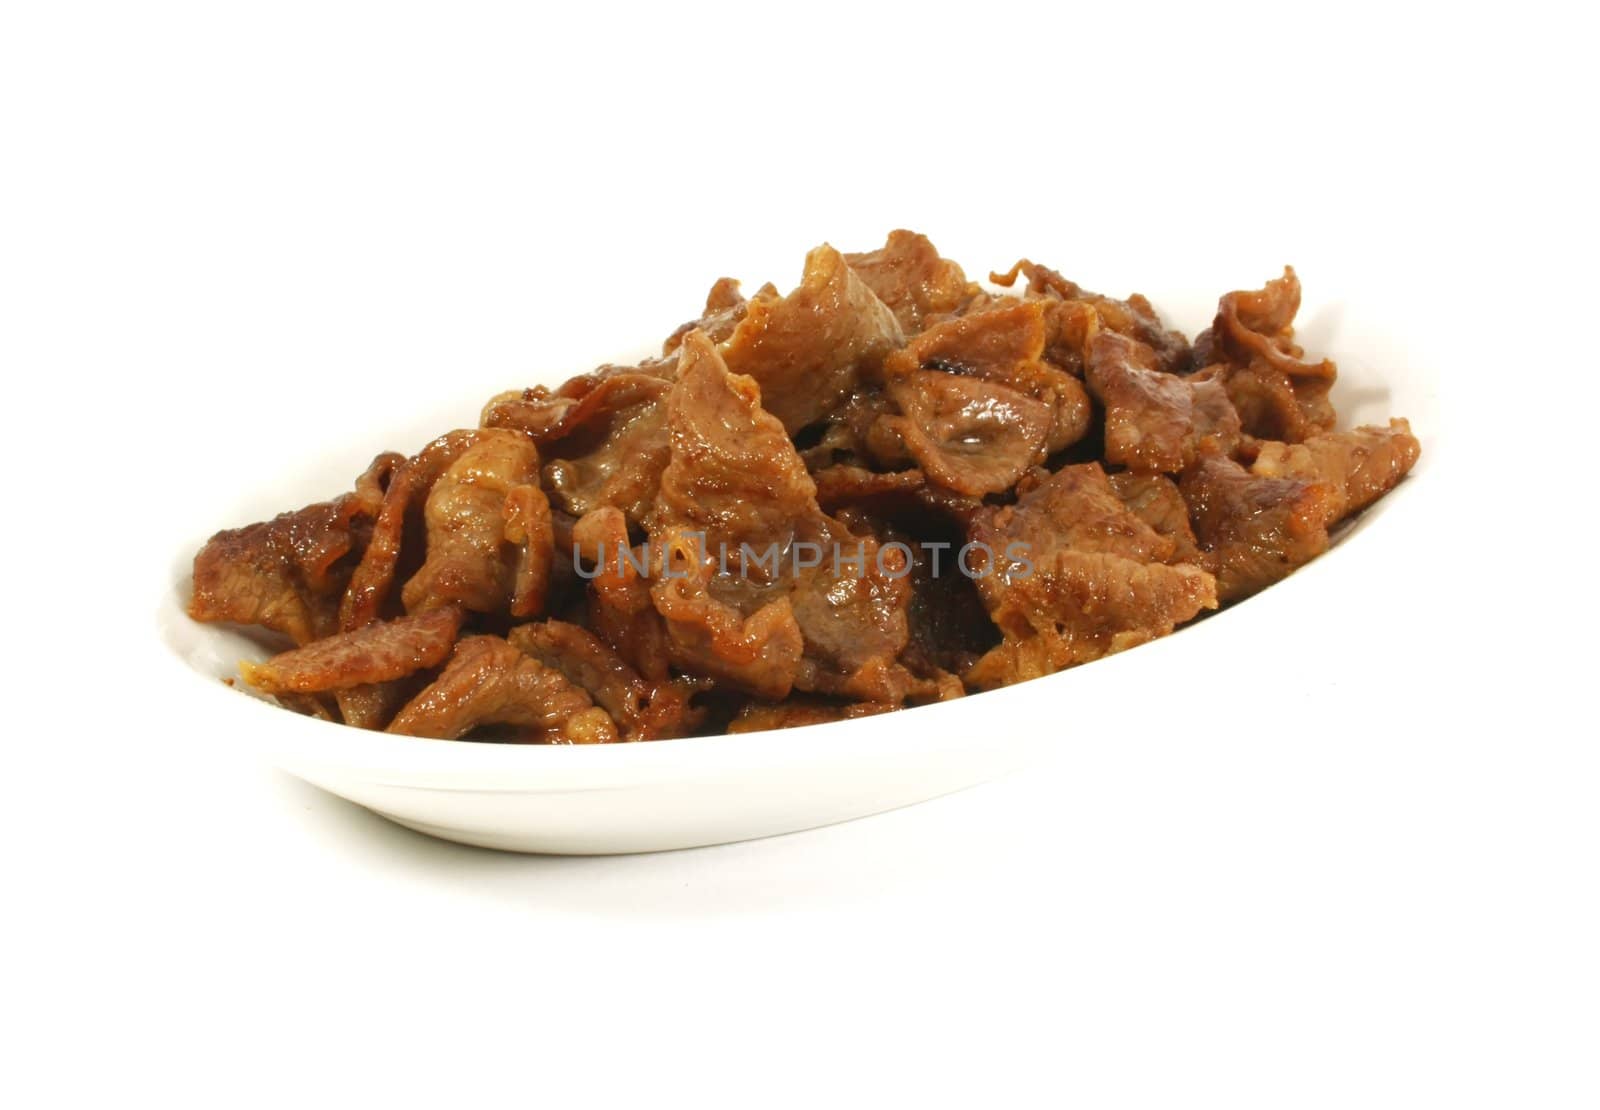 Stir Fried Beef Stips on a White Surface